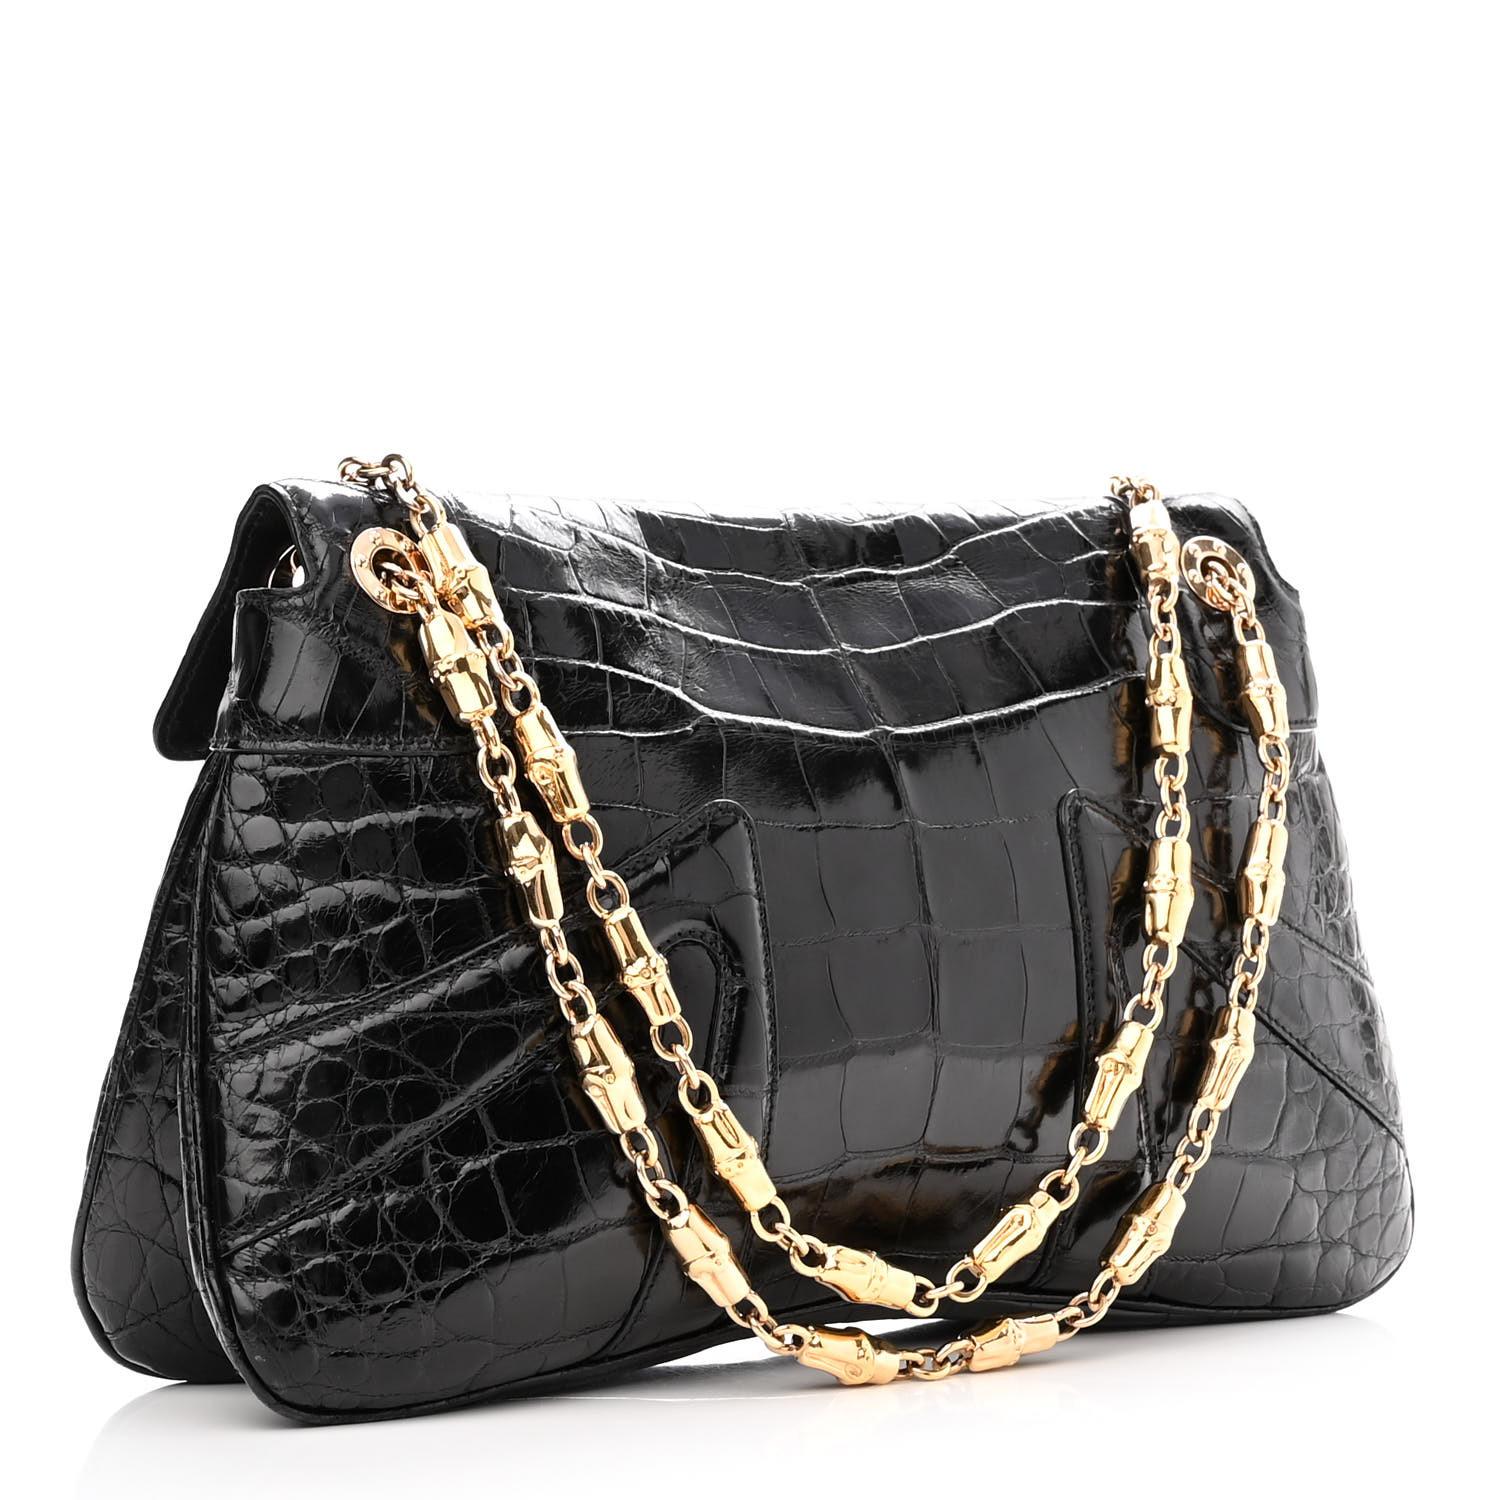 2004 Vintage Tom Ford for GUCCI Black Alligator Bag with Crystal Embellishment
The bag features gold bamboo shaped chains, a frontal flap and a double headed jeweled dragon clasp. 
Opens to a black smooth leather interior with a patch